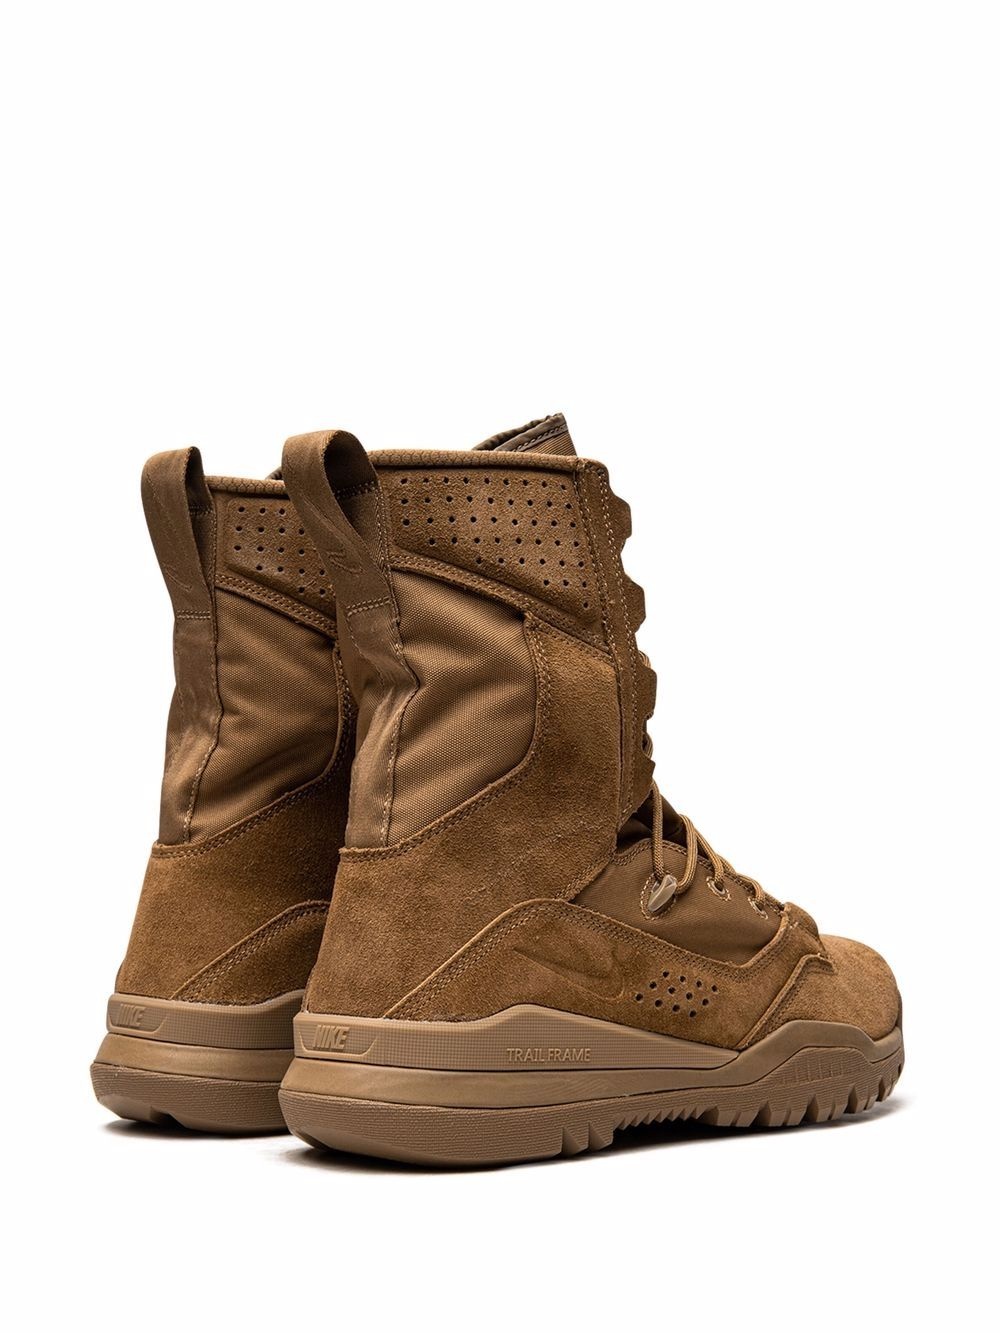 SFB Field 2 8 Inch military boots - 3